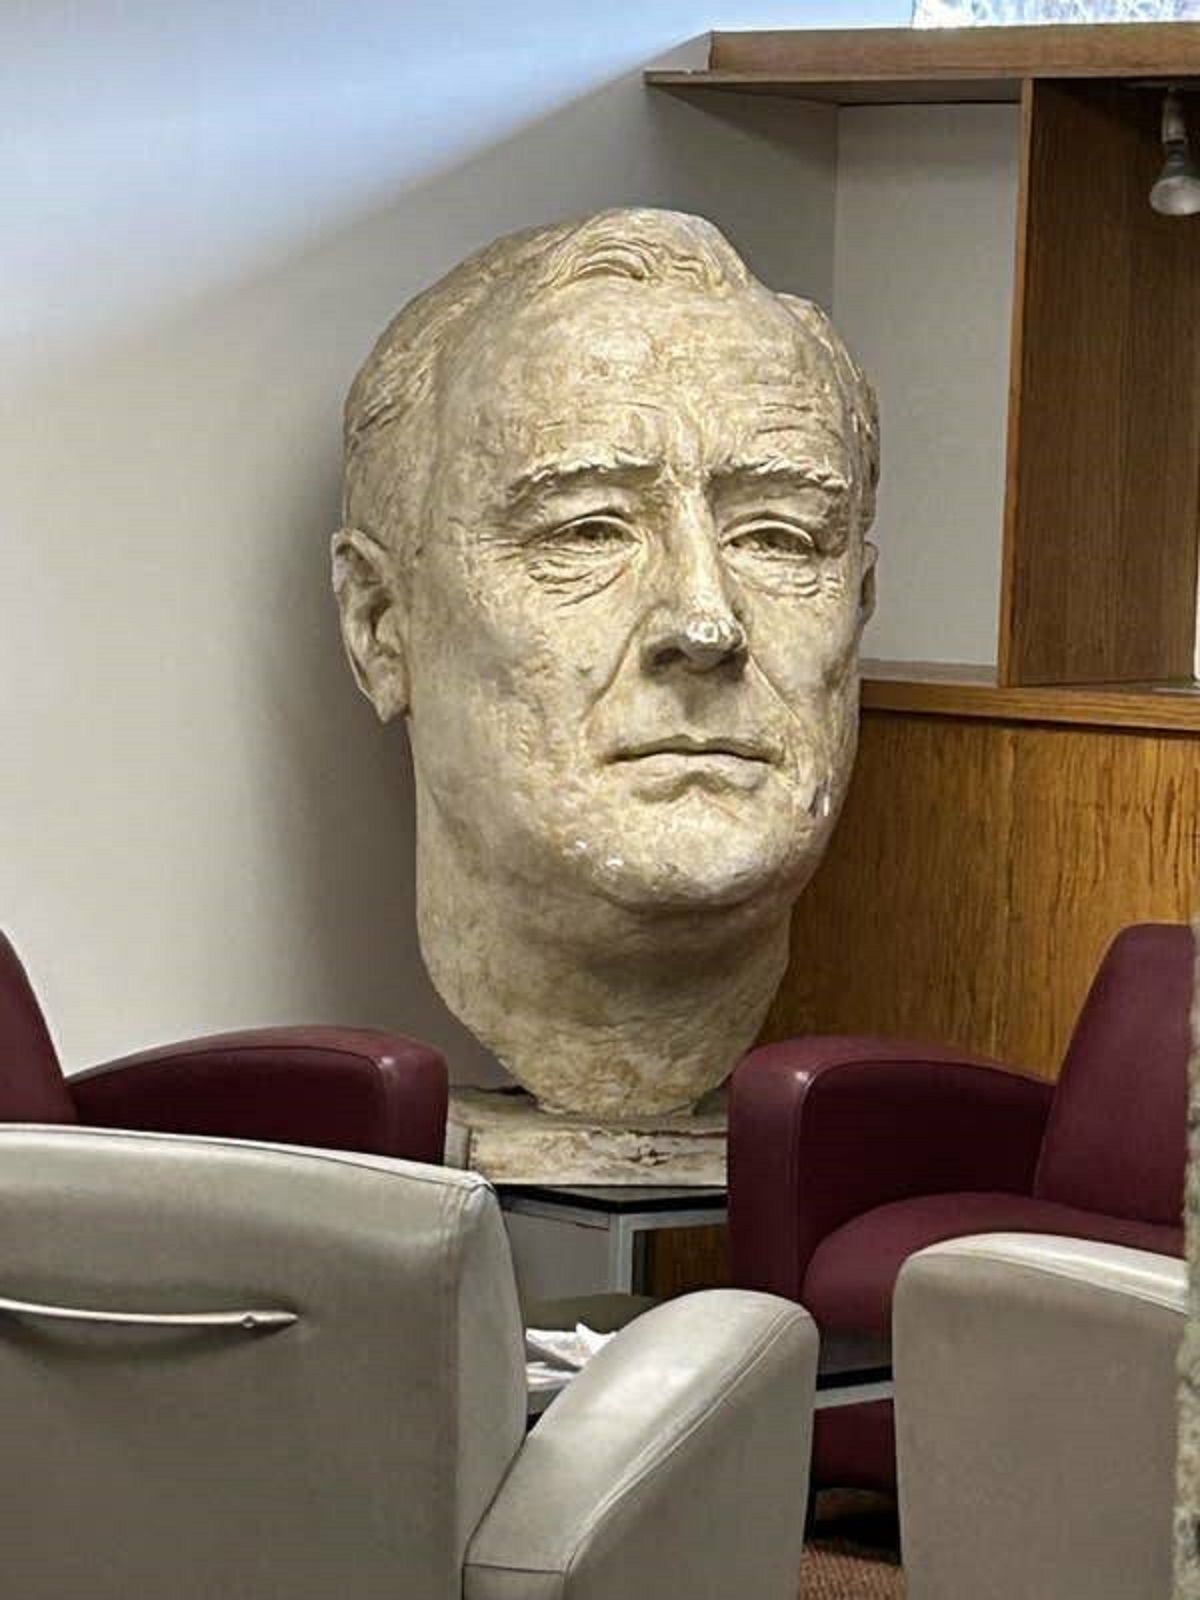 This is the bust of President Franklin D. Roosevelt that was used as a model for the design on the dime: